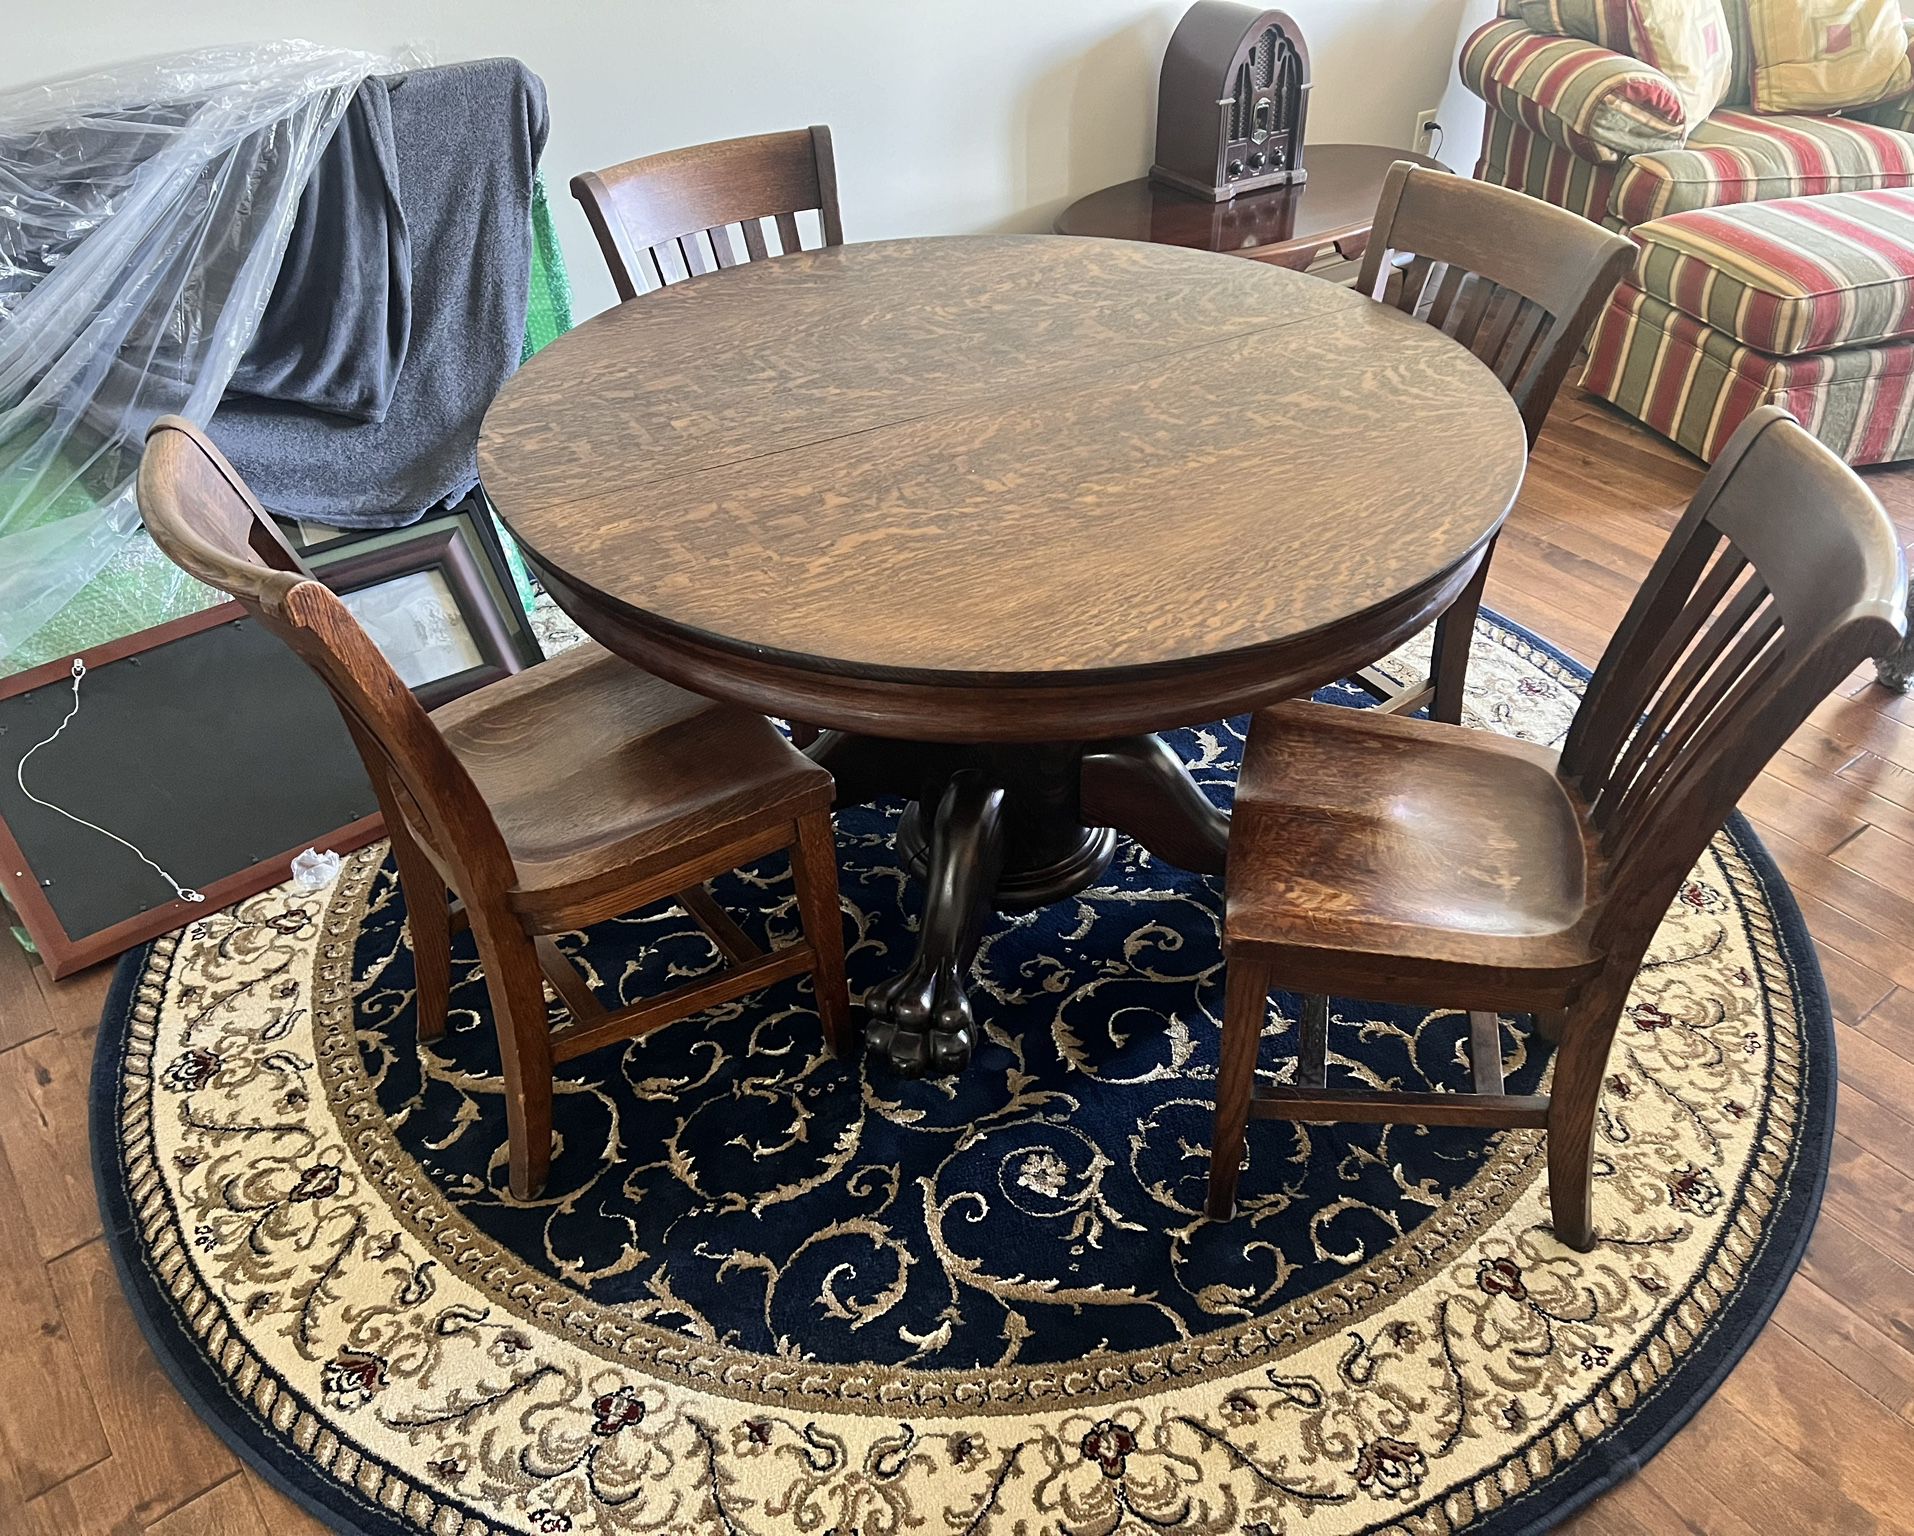 Antique wood Table And Chairs